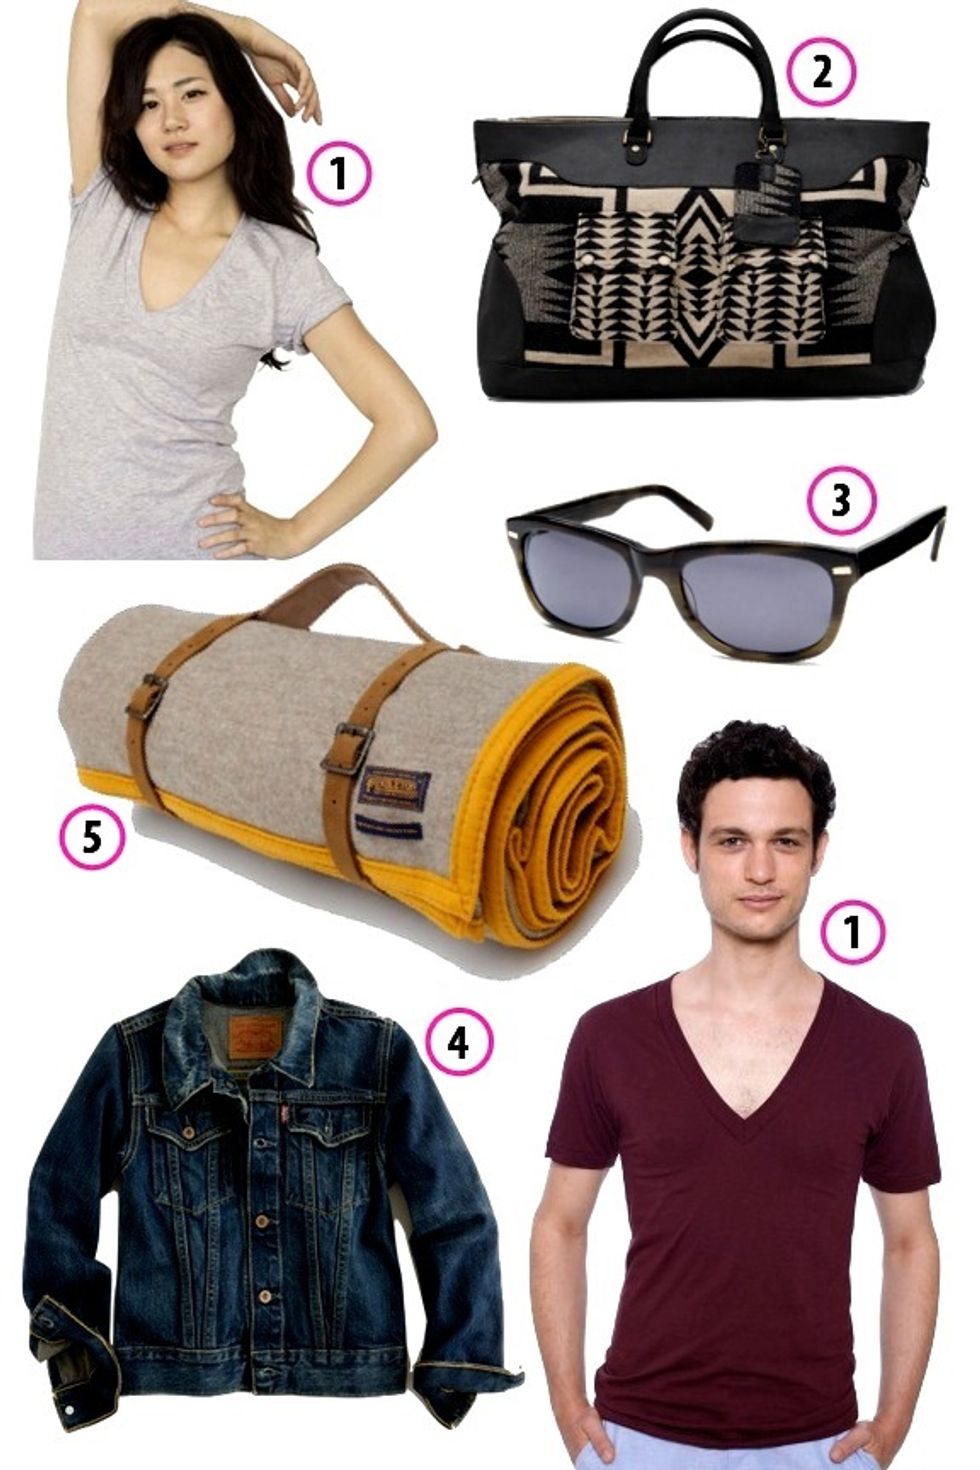 Look of the Week: 5 Cool Unisex Finds for Hardly Strictly Bluegrass This Weekend